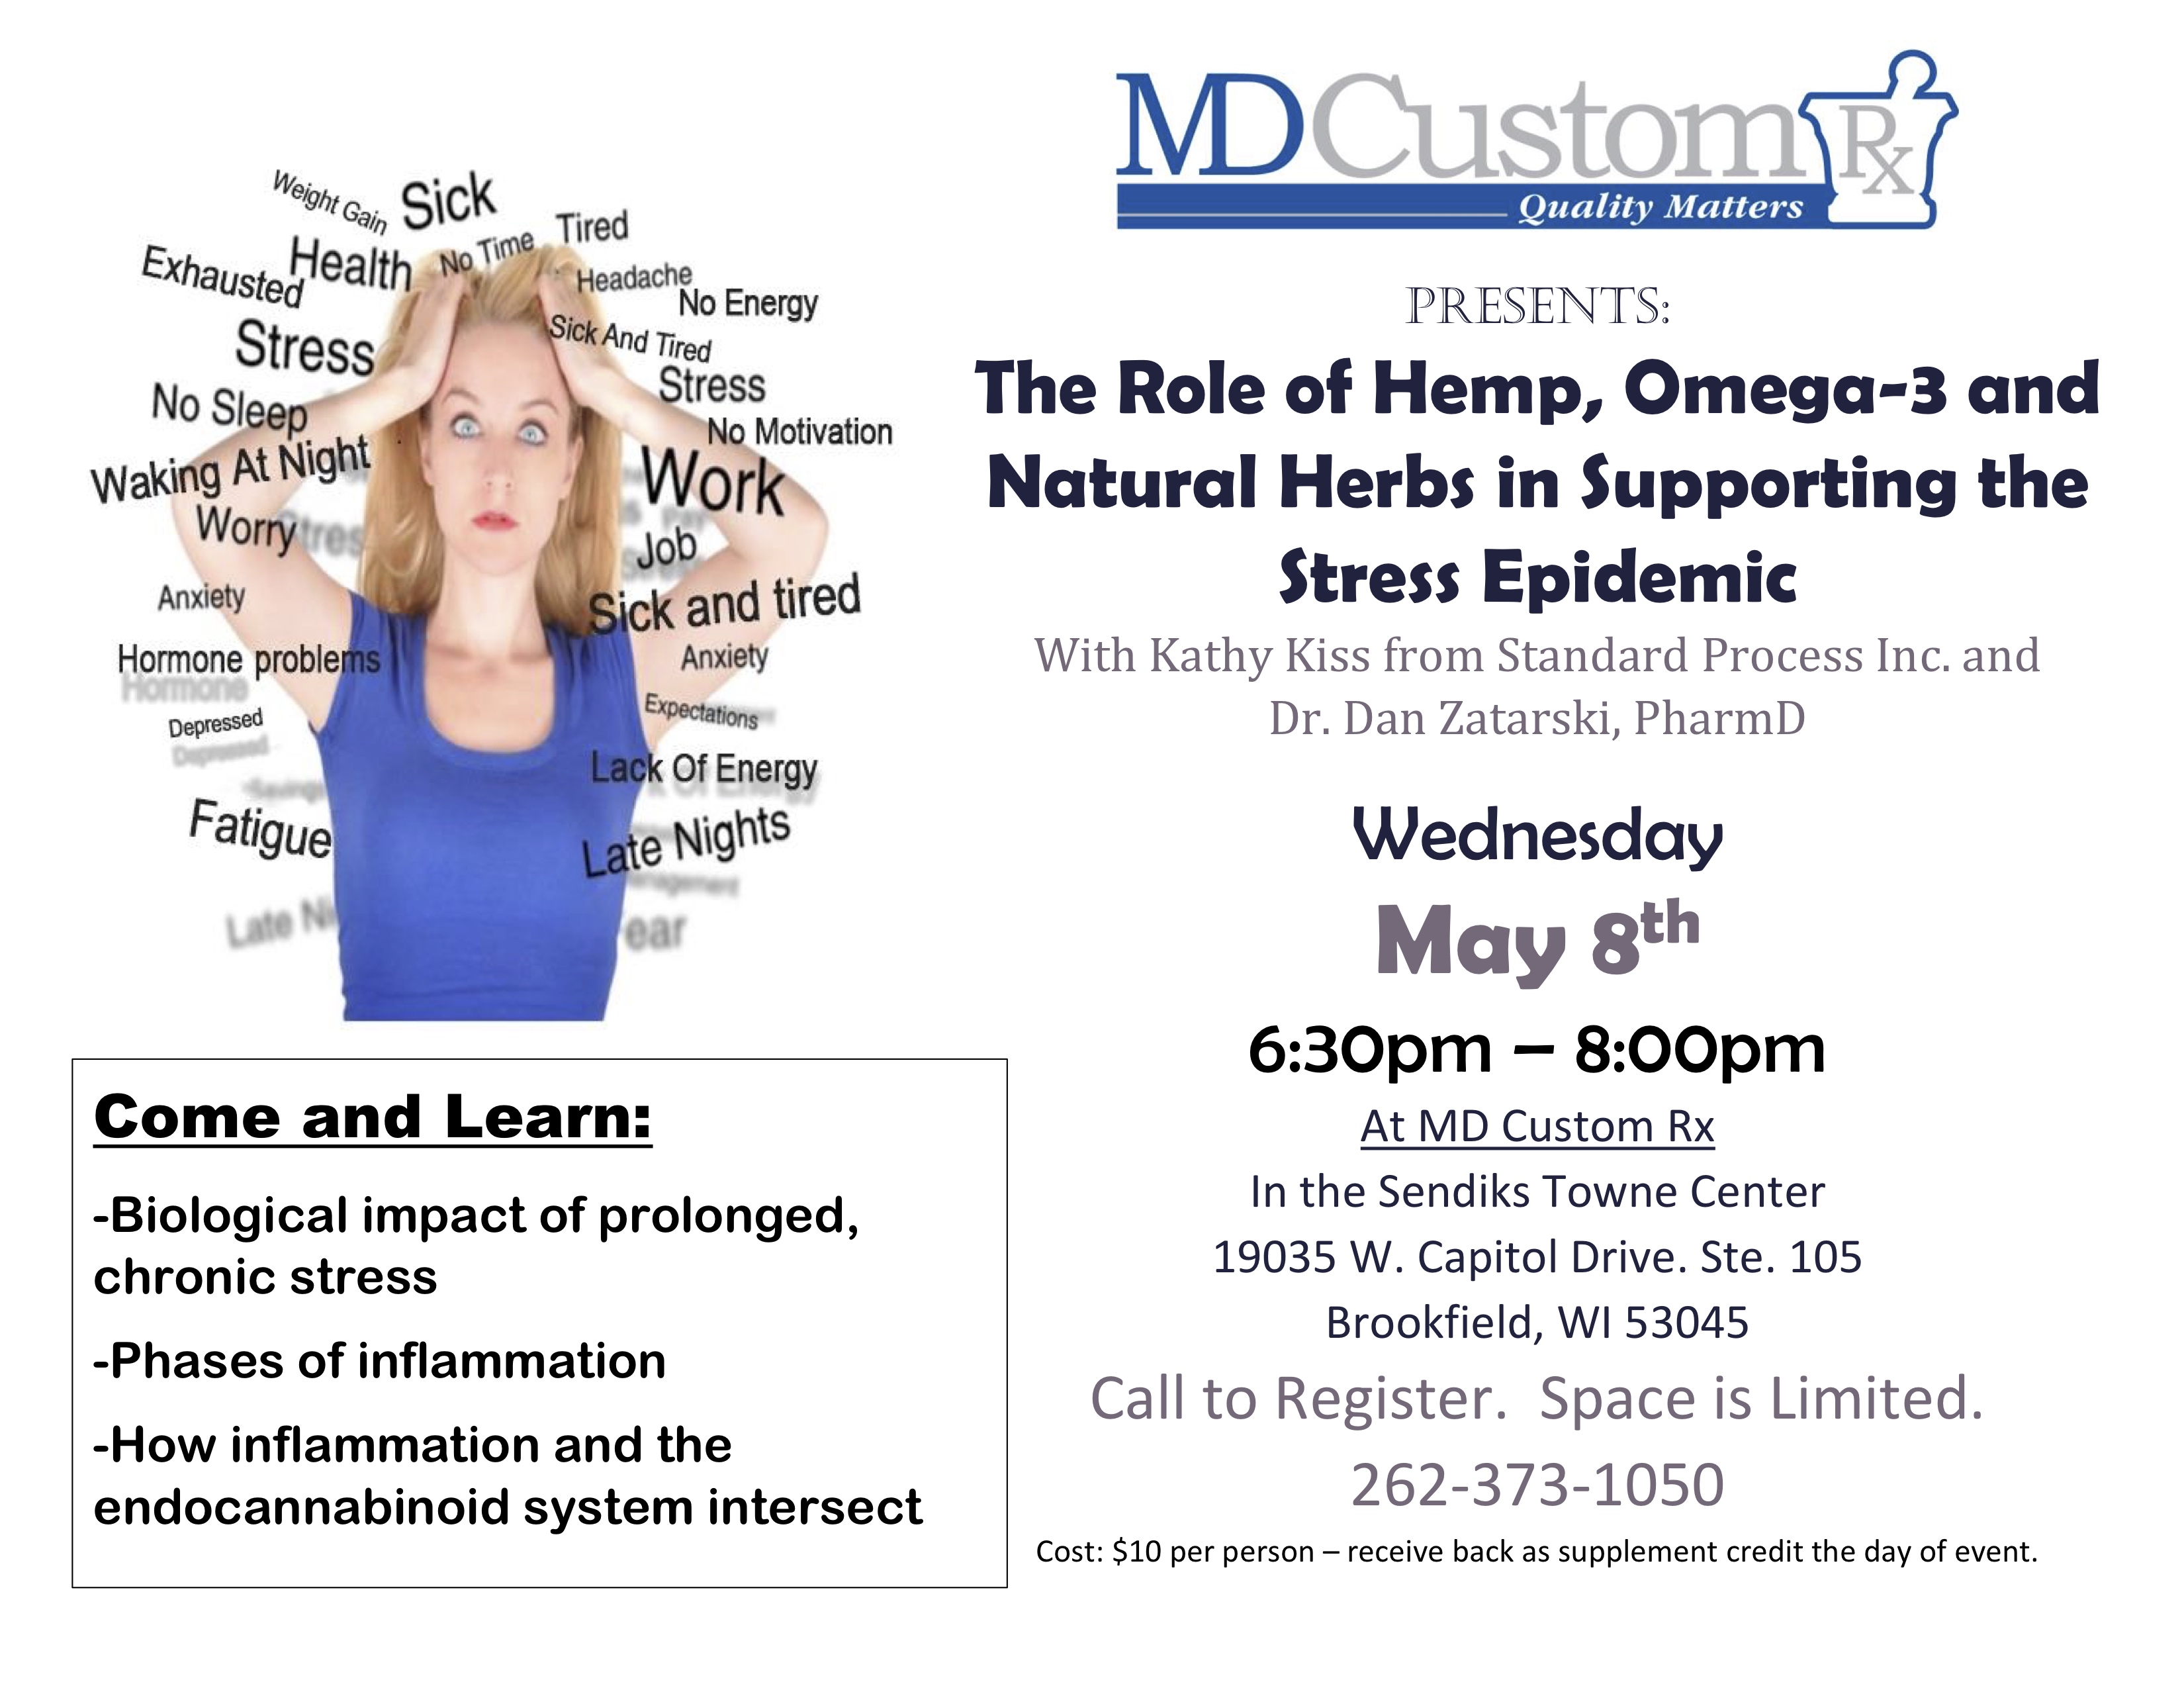 The Role of Hemp, Omega-3 and Natural Herbs in Supporting the Stress Epidemic